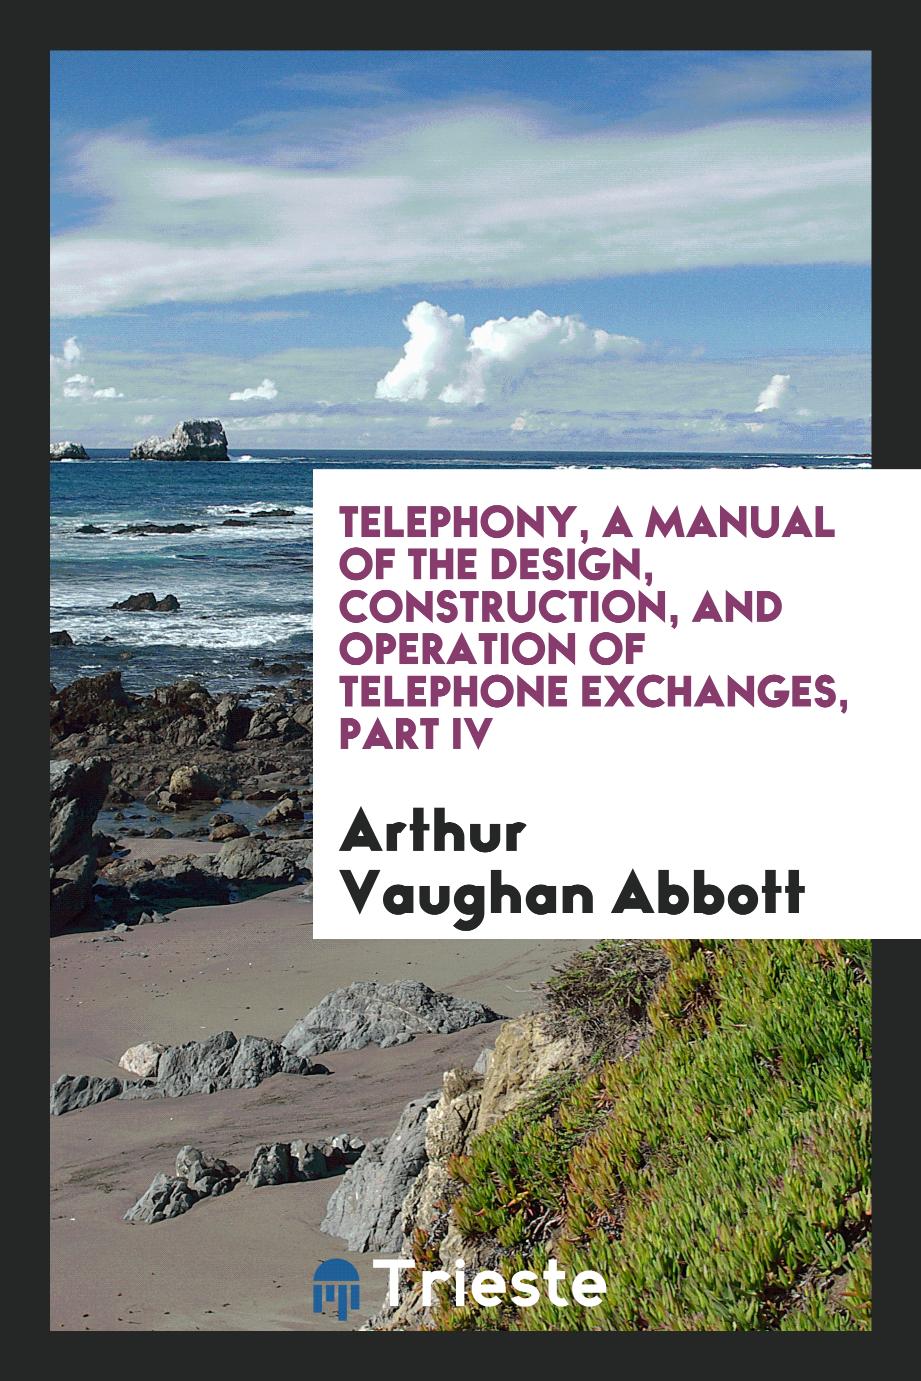 Telephony, a manual of the design, construction, and operation of telephone exchanges, part IV